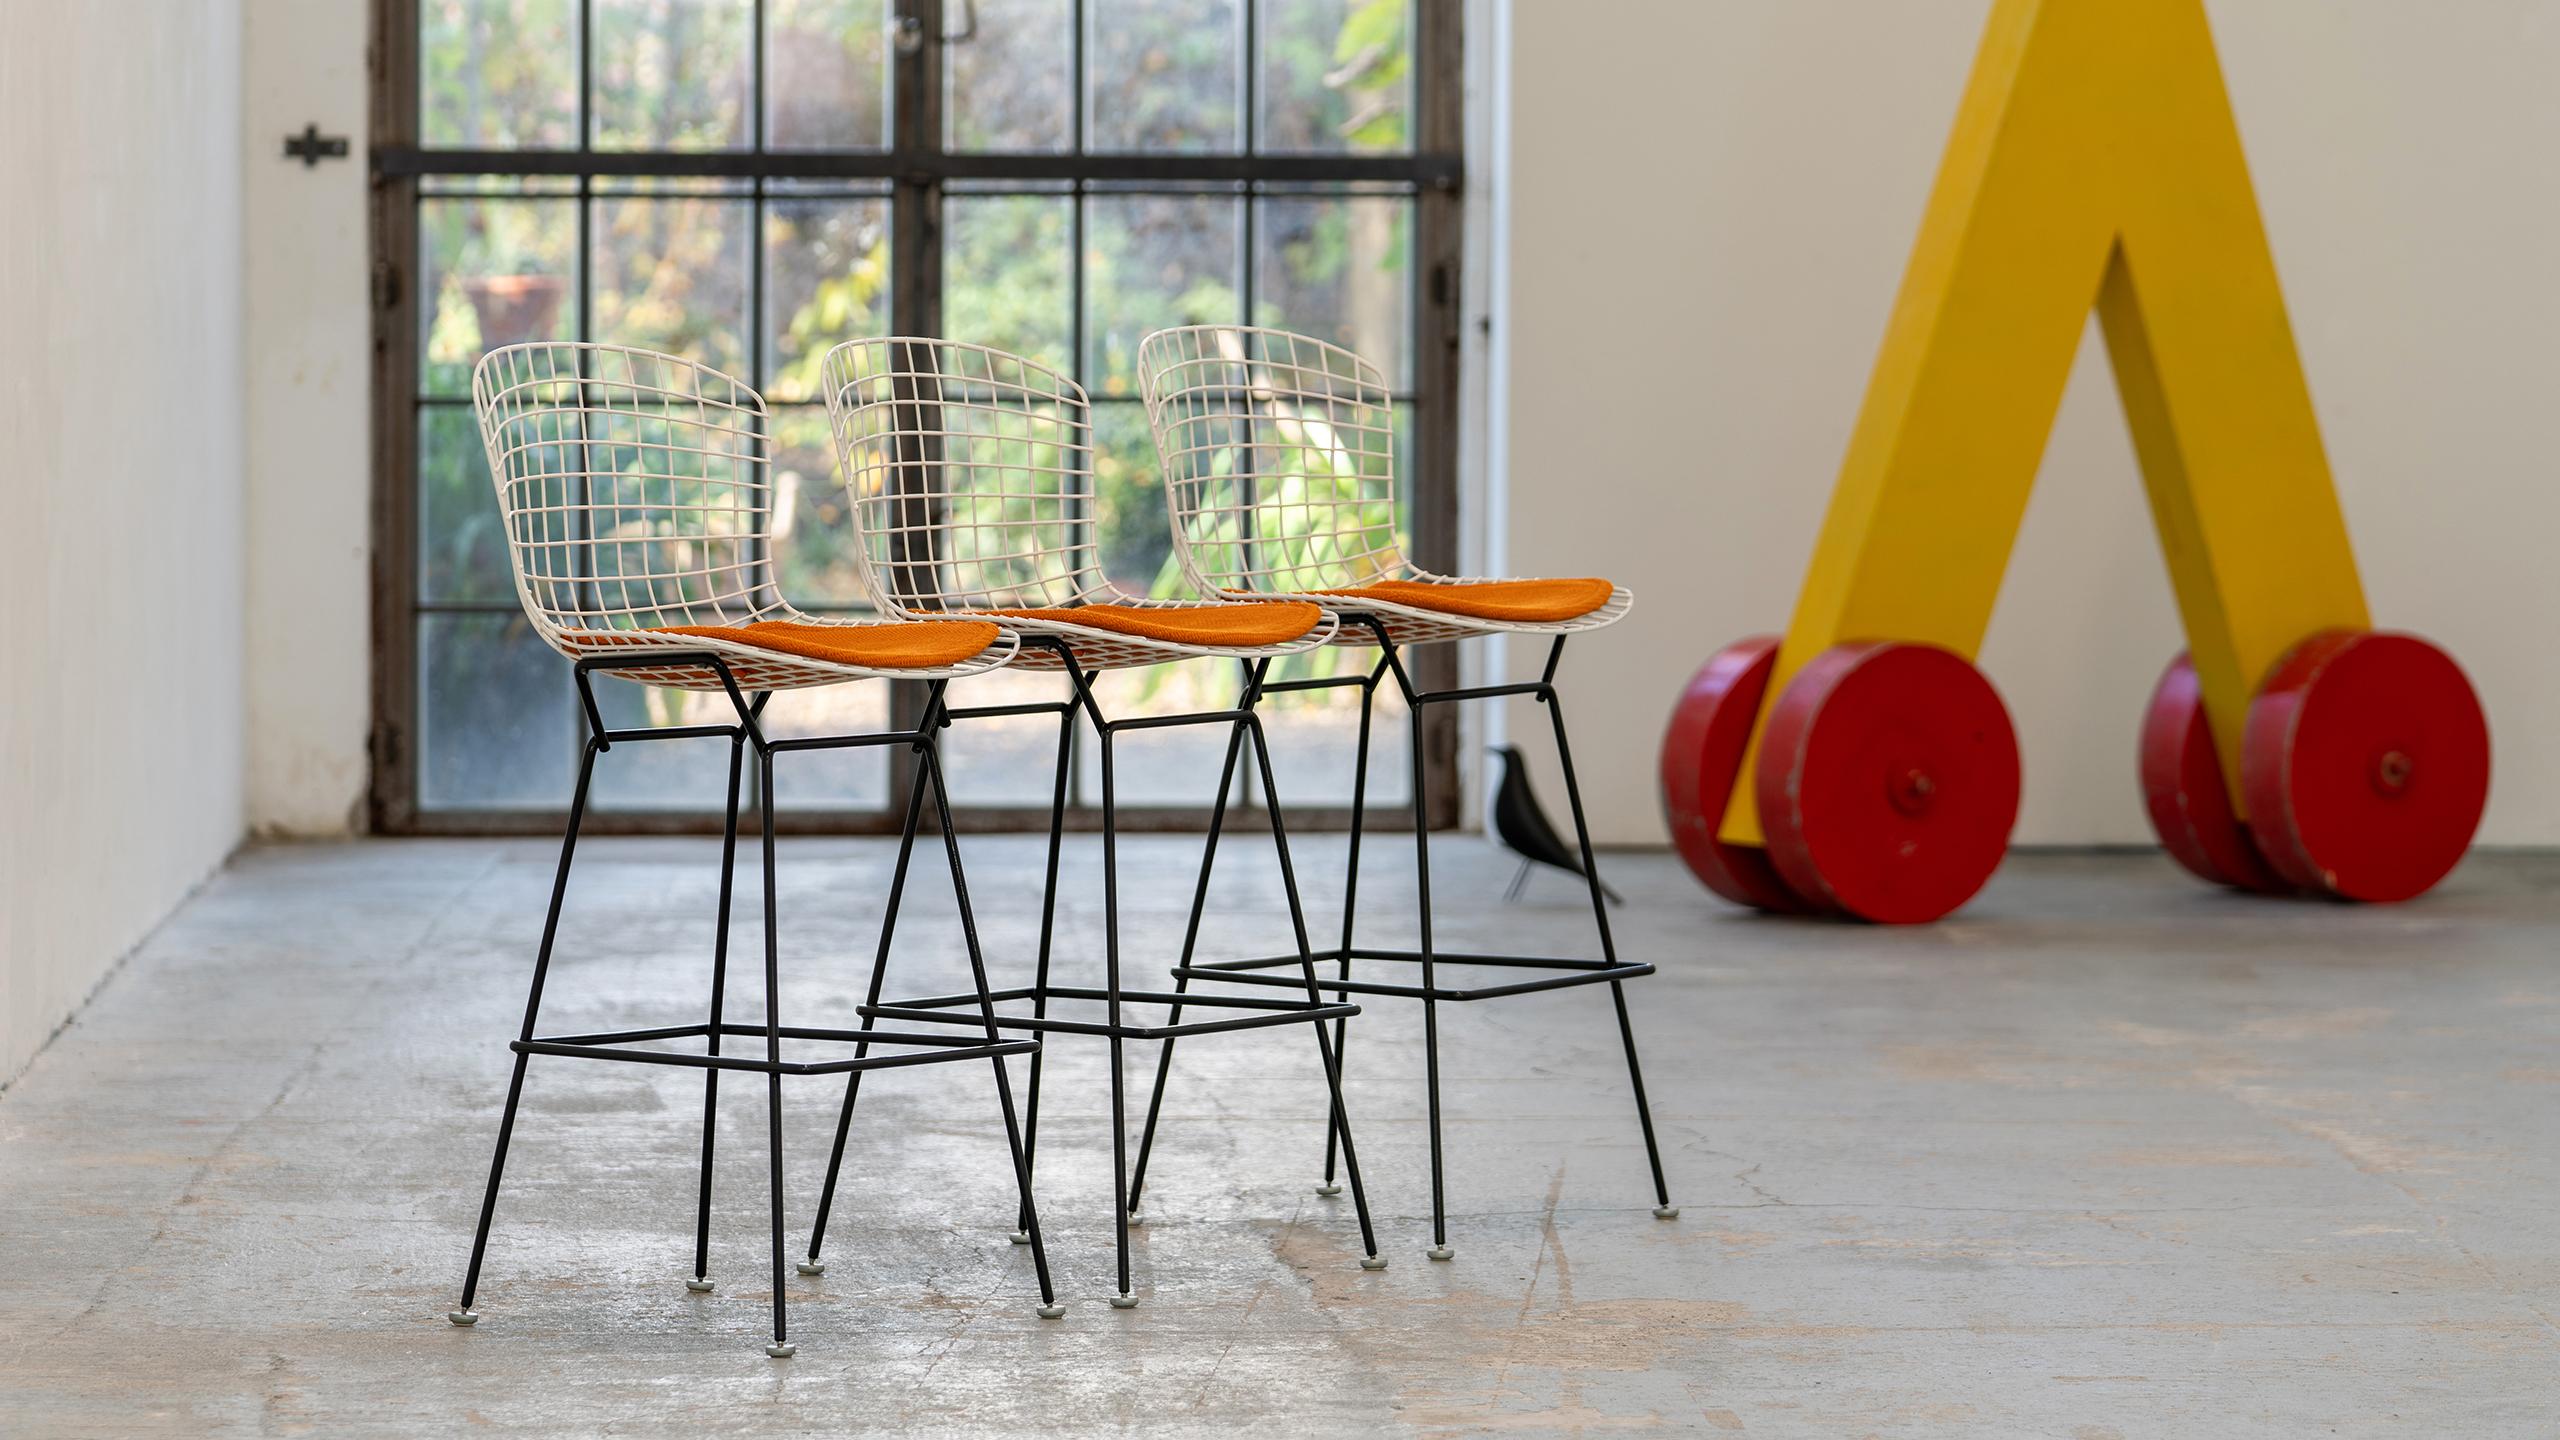 Set of 3x Bertoia Bar Stools - Designed by Harry Bertoia, 1952 for Knoll International.

The Bertoia Barstool is part of Harry Bertoia’s iconic 1952 wire collection,
an astounding study in space, form and function by one of the master sculptors of